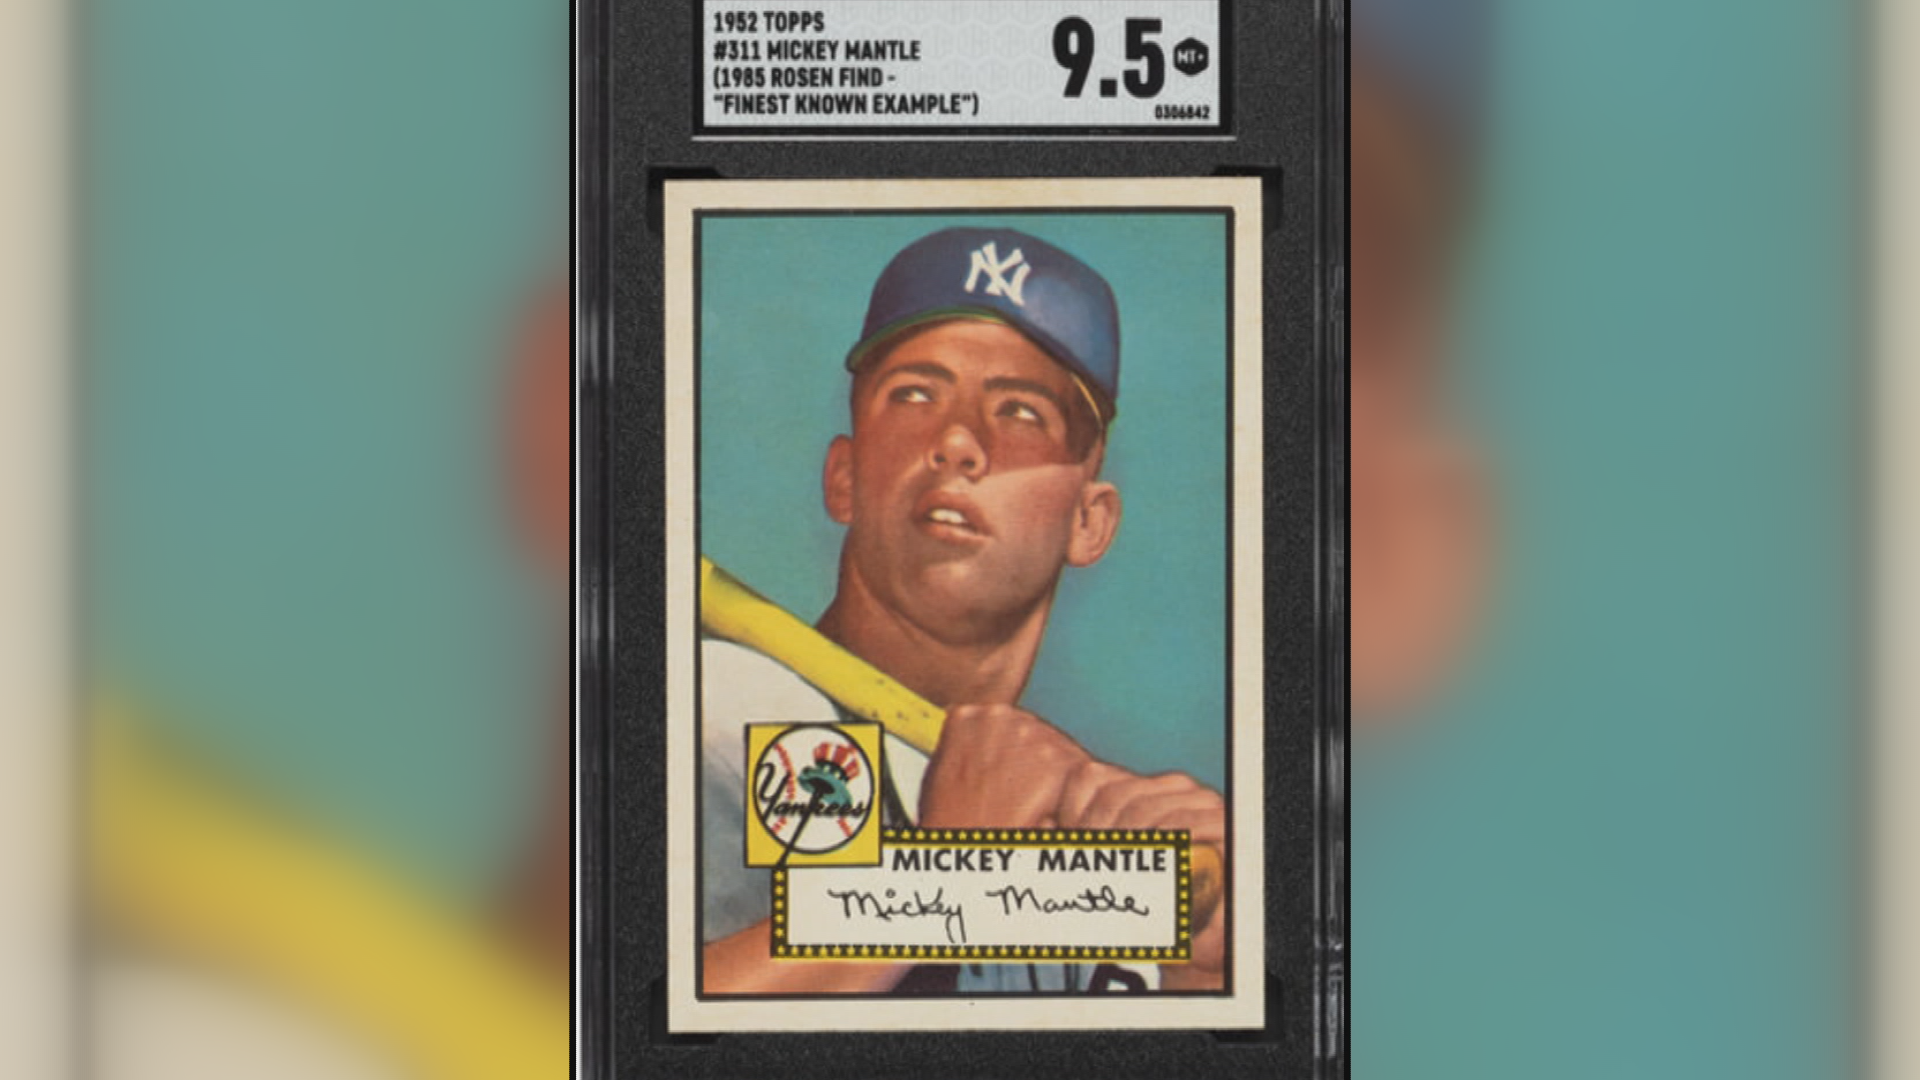 Baseball card sells for more than $12 million at auction